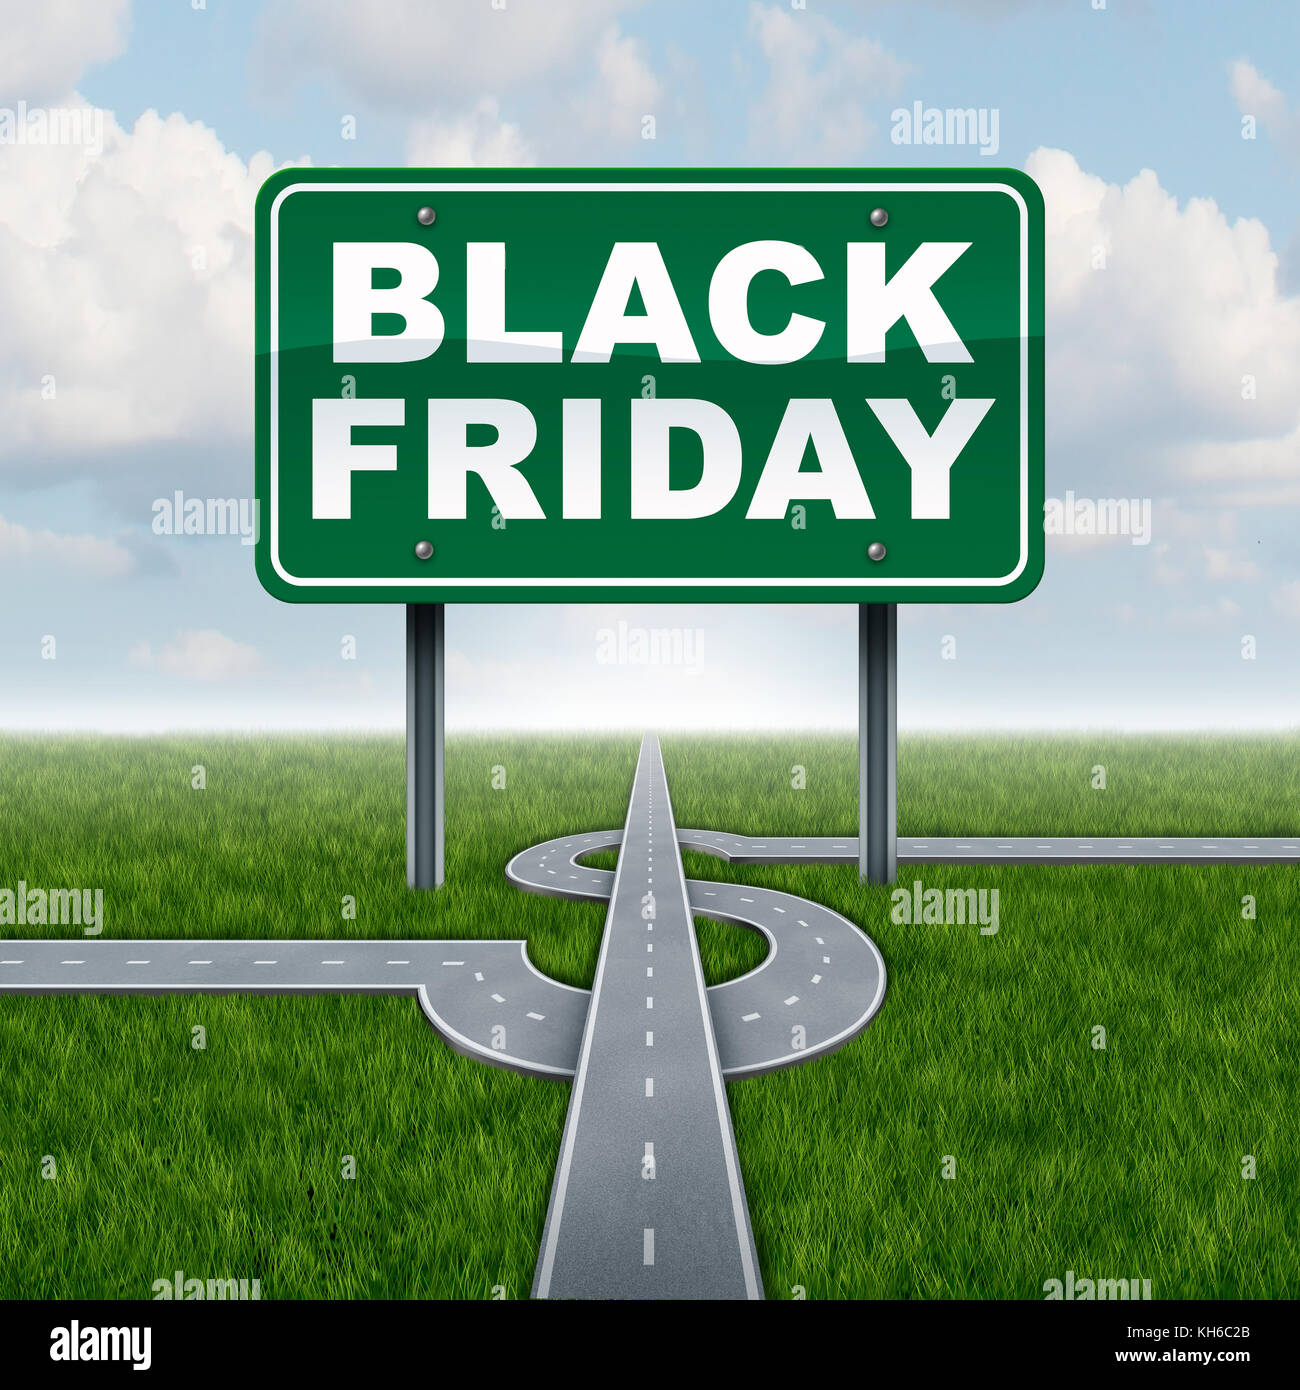 Black friday sales sign and seasonal retail promotion advertising and marketing for discounted prices as a street sign and dollar sign road. Stock Photo